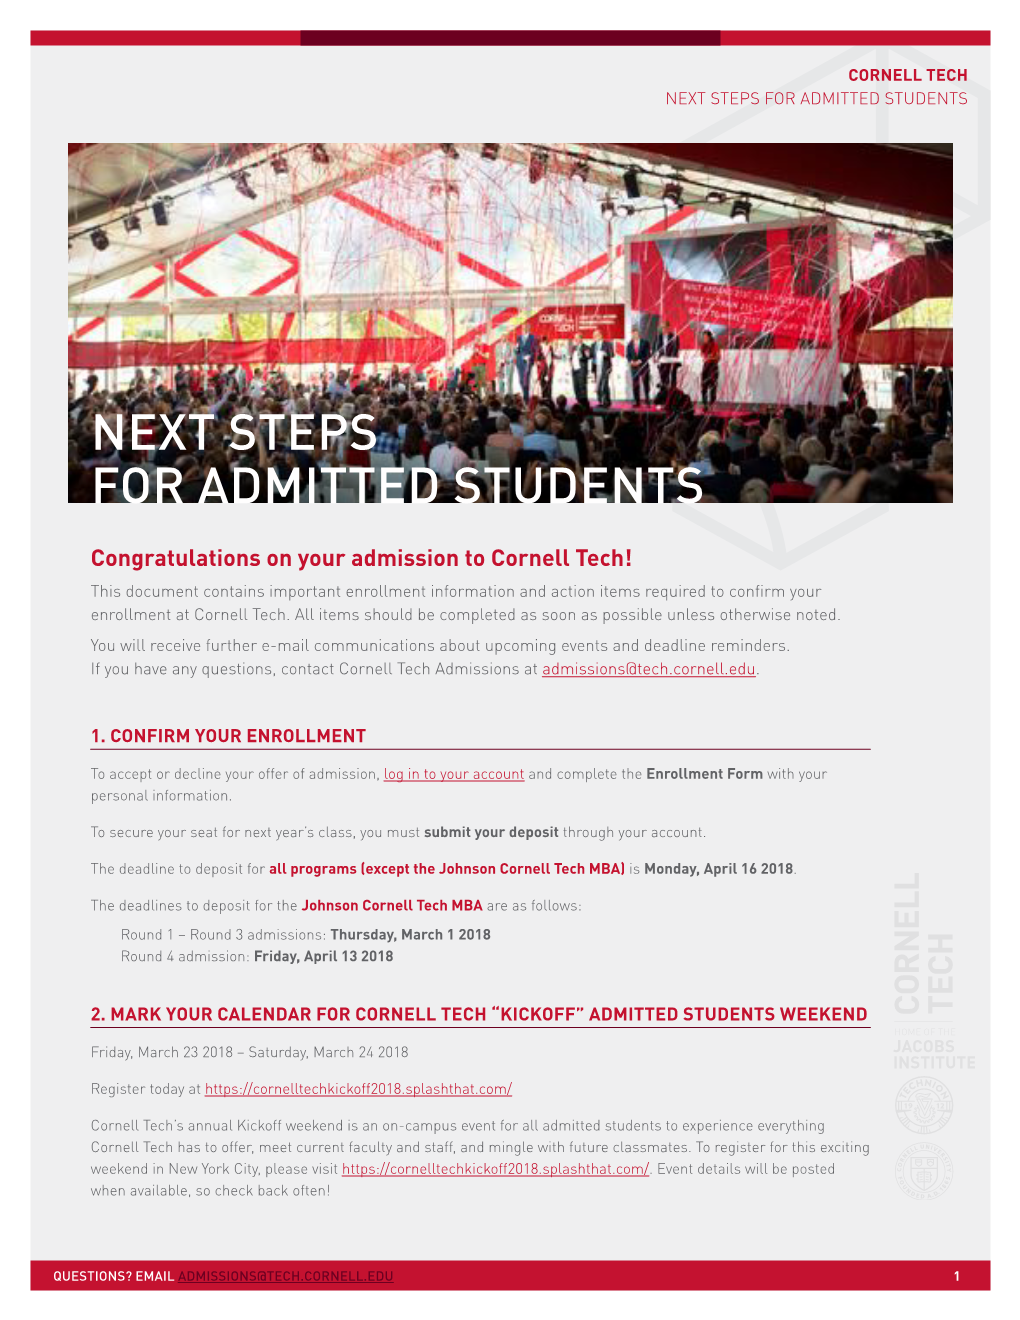 Next Steps for Admitted Students